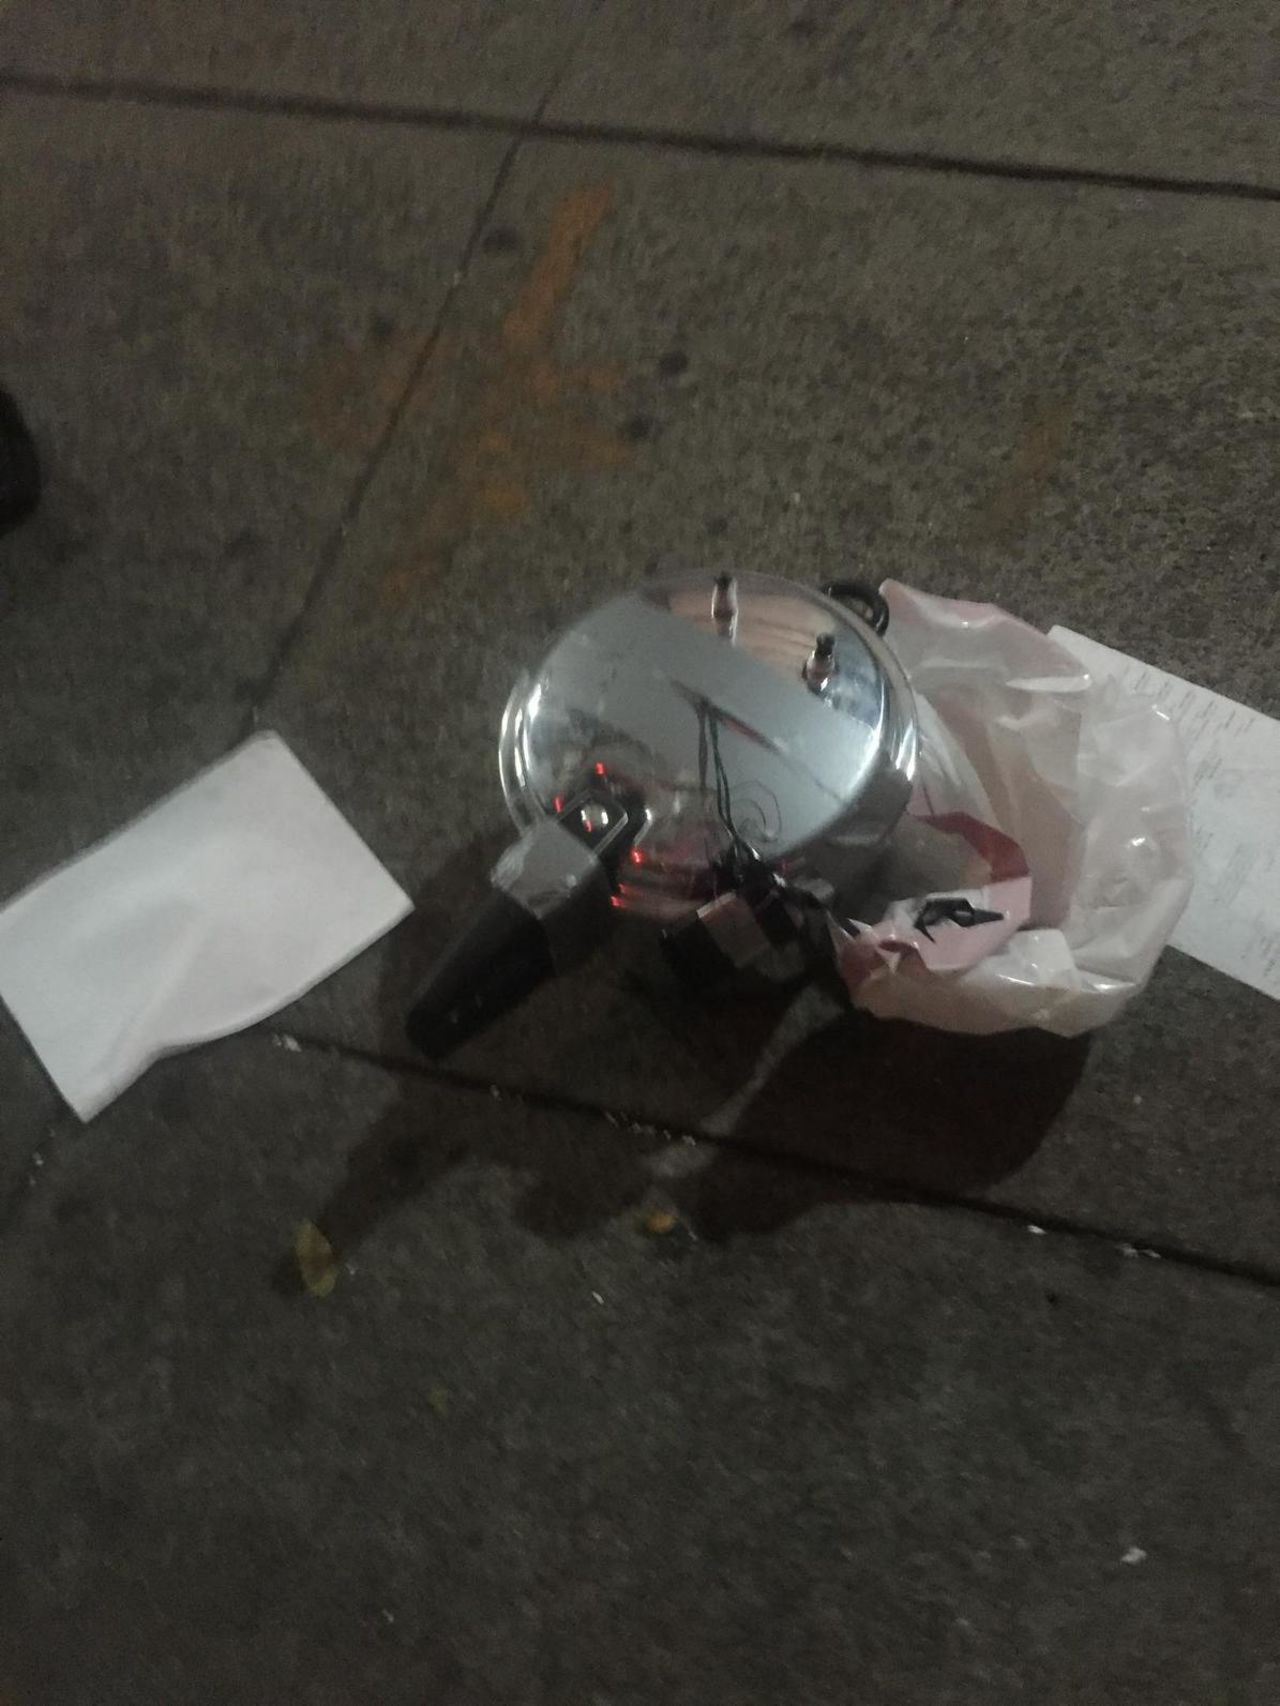 Just blocks away from the explosion, a suspicious device was found. Officials said the device appeared to be a pressure cooker with dark-colored wiring protruding, connected by silver duct tape to what appeared to be a cell phone.